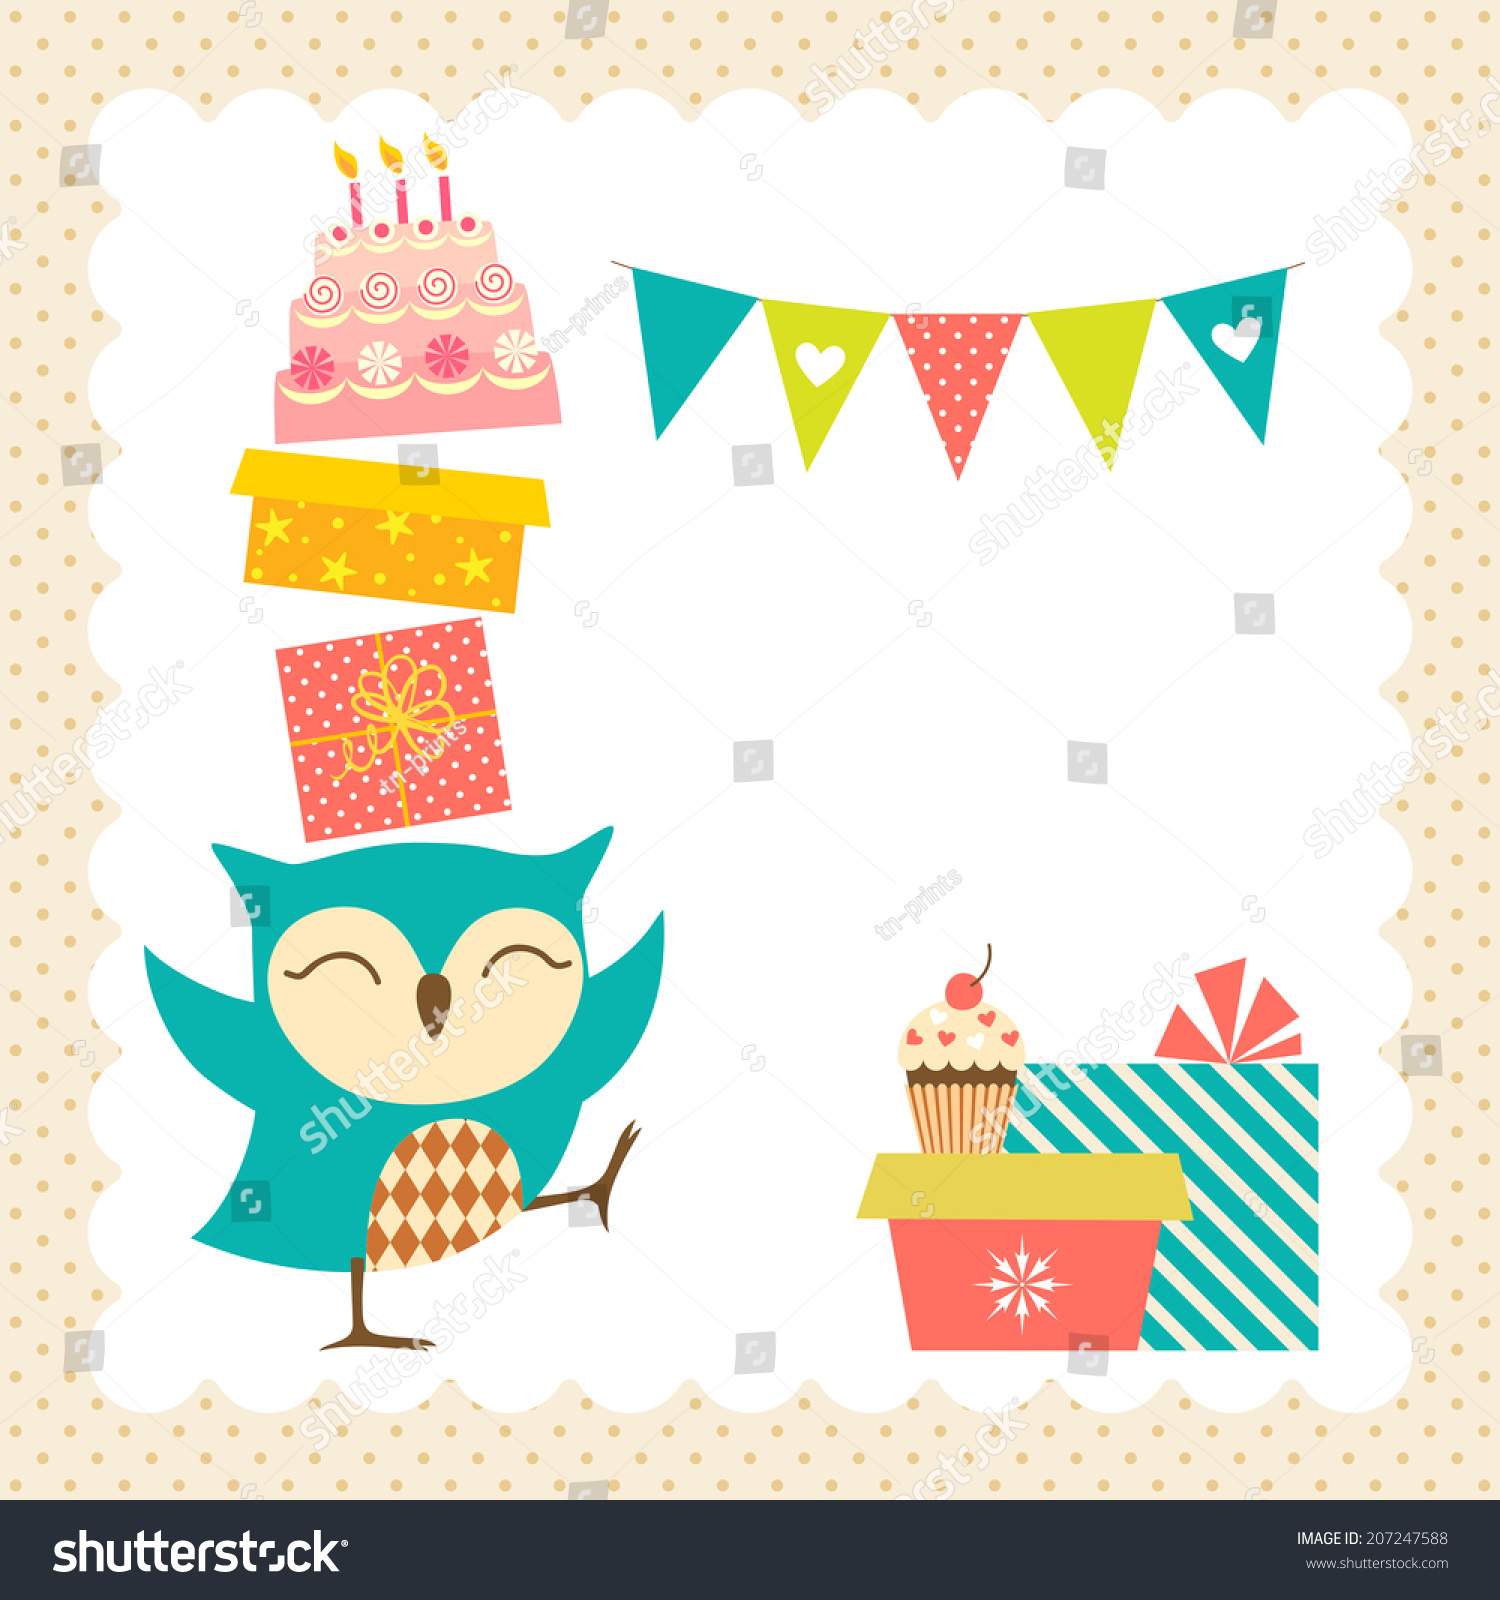 Birthday Greeting Card With Place For Your Text. Stock Vector 207247588 ...